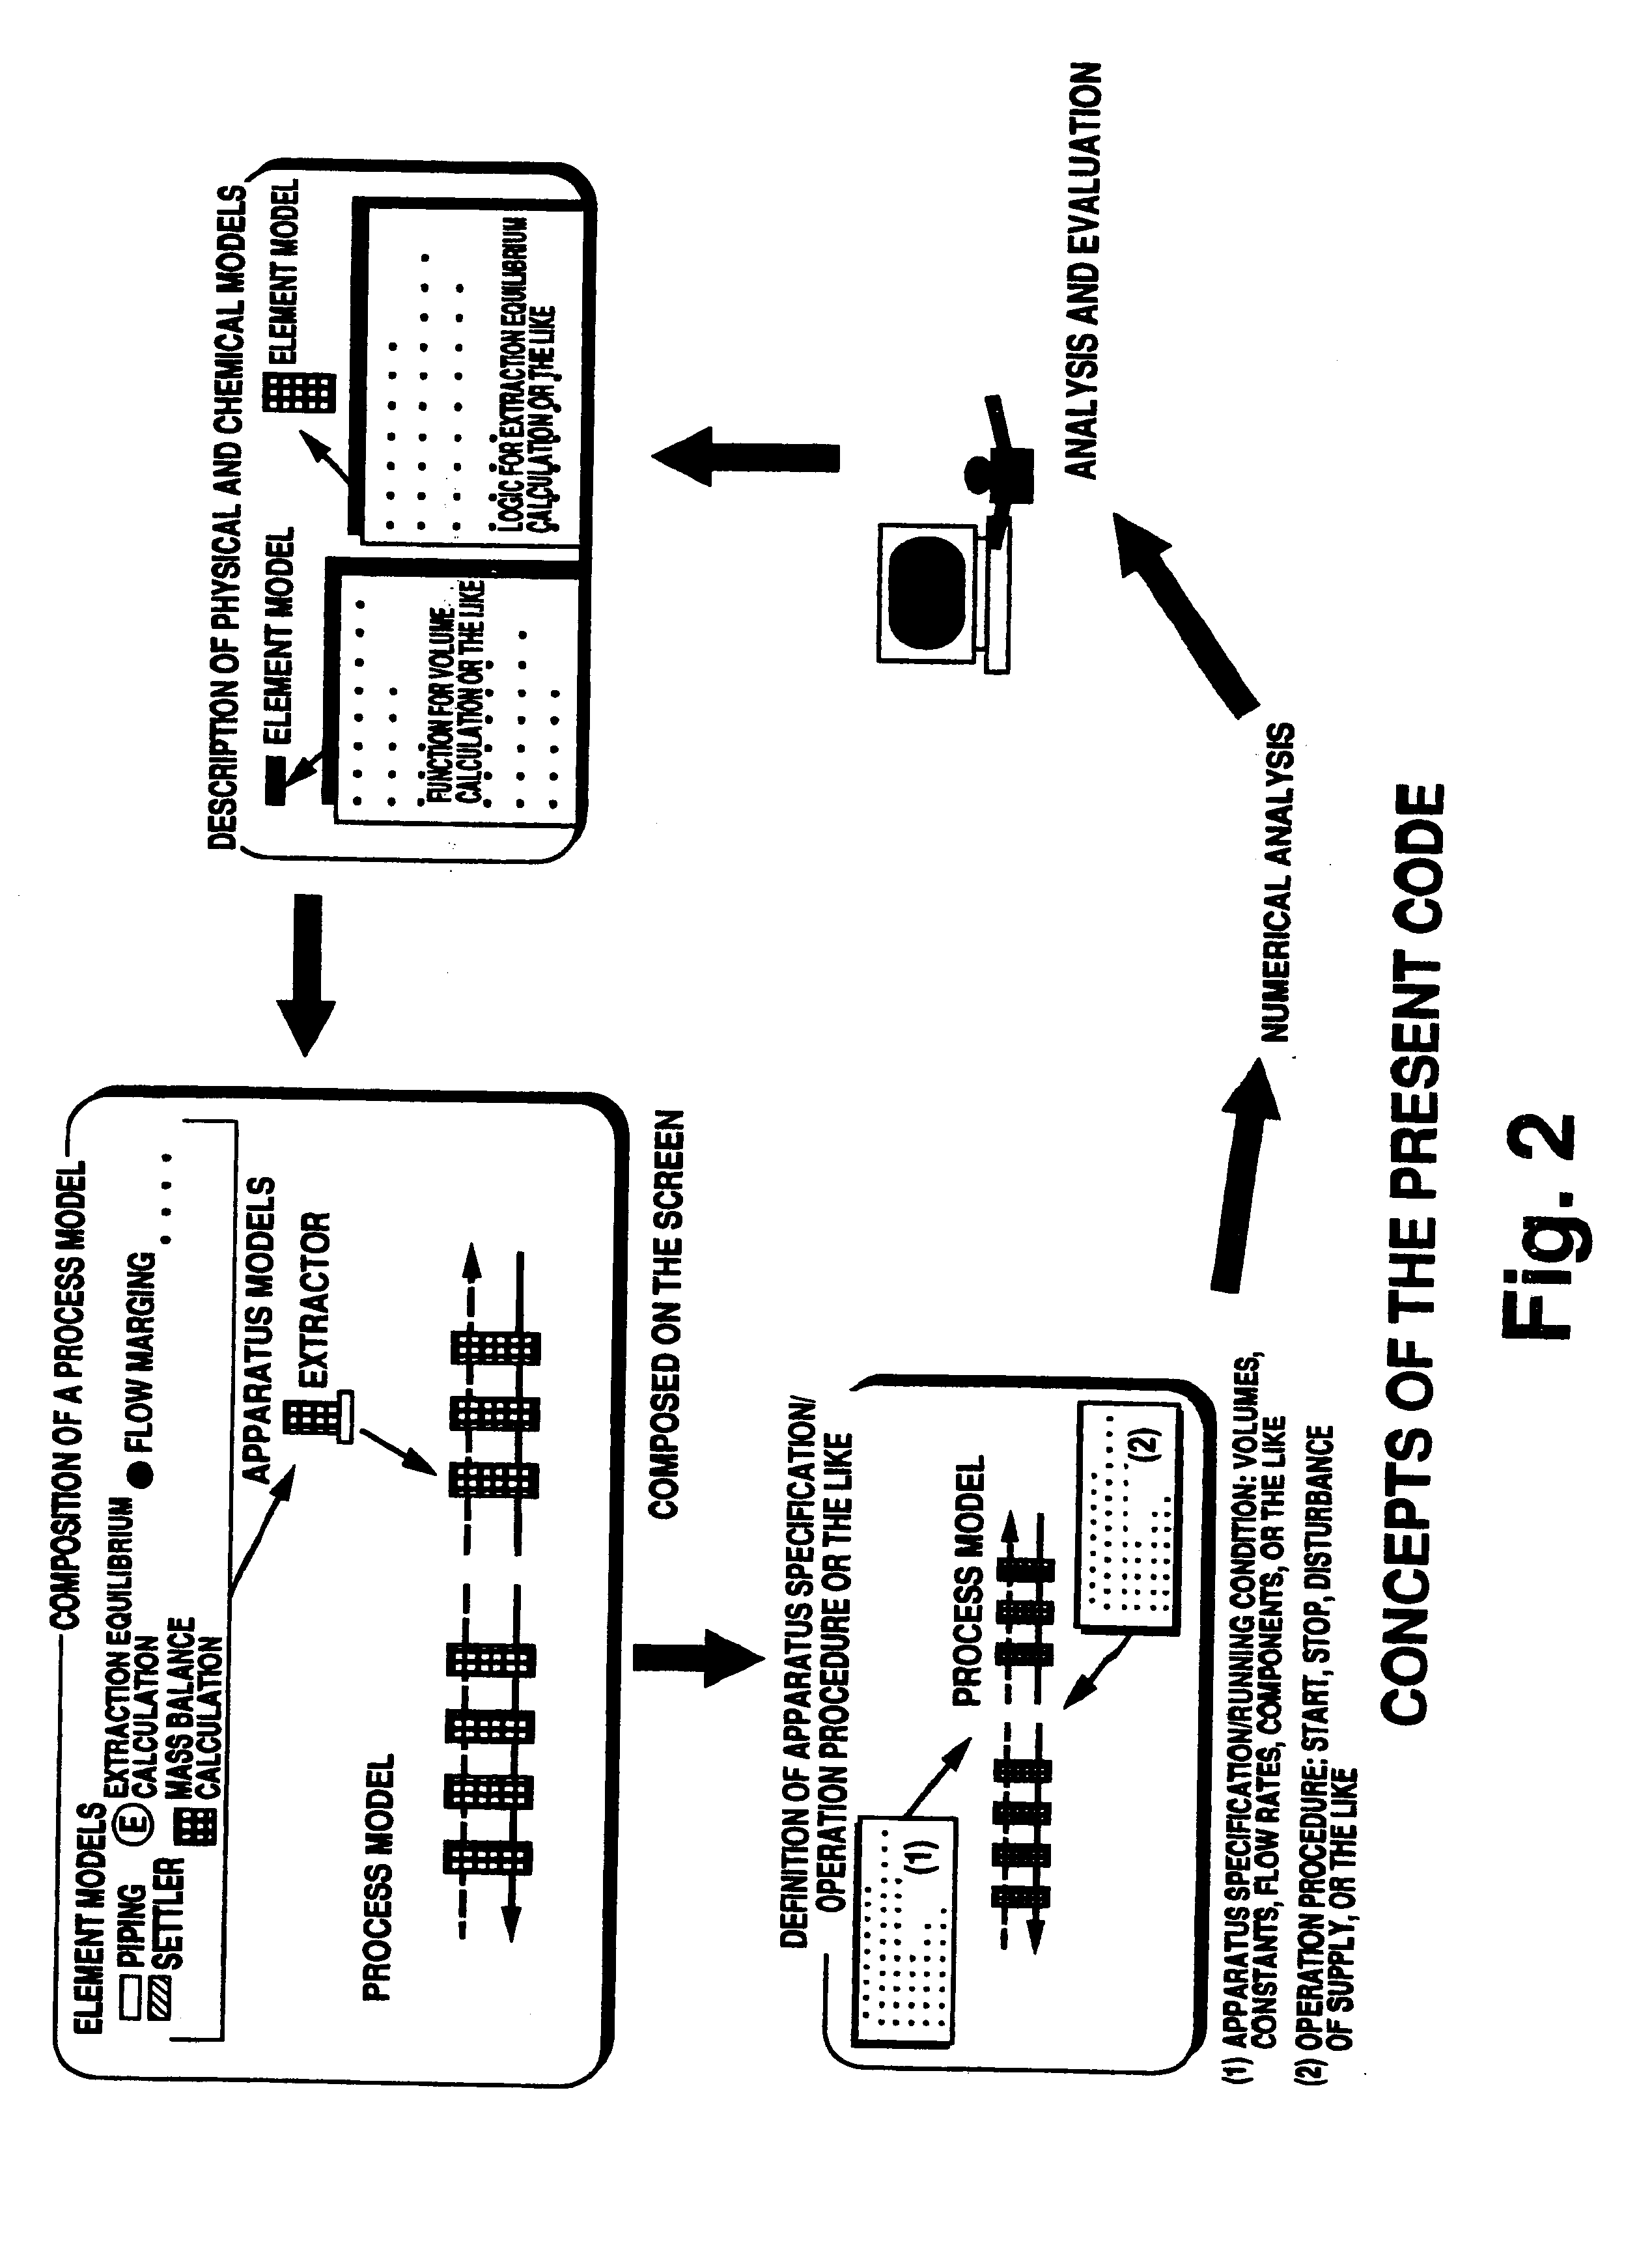 Simulation method of extraction system